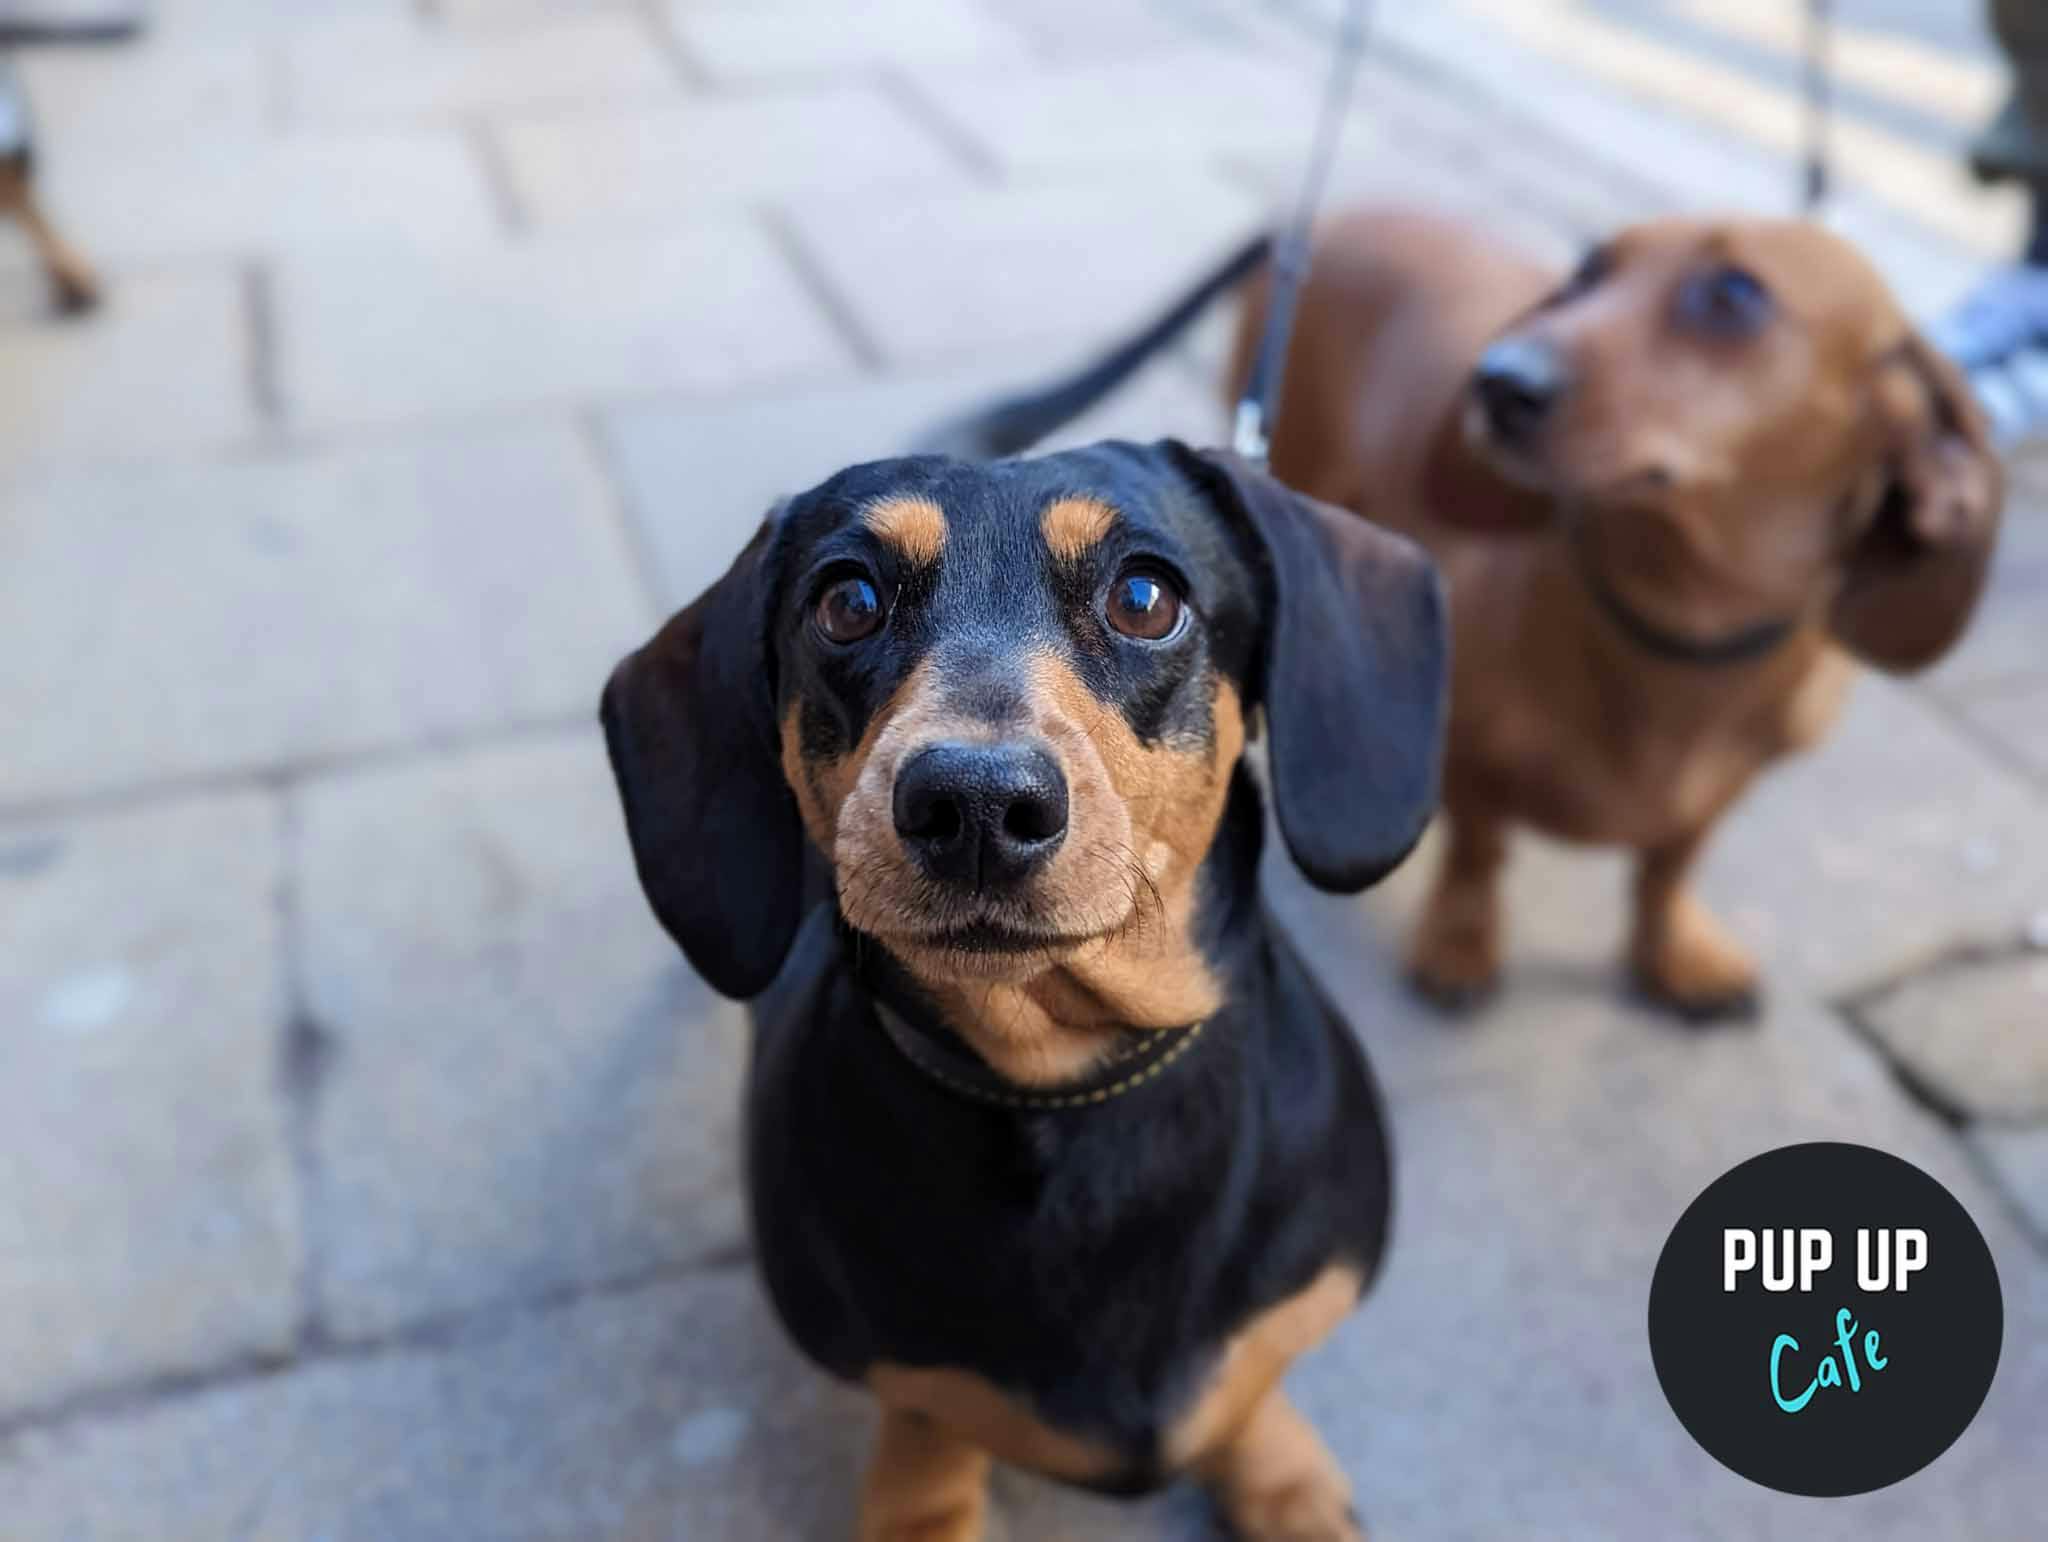 Birmingham Live visit the Pup Up Cafe and fall in love with the Dachshund pups